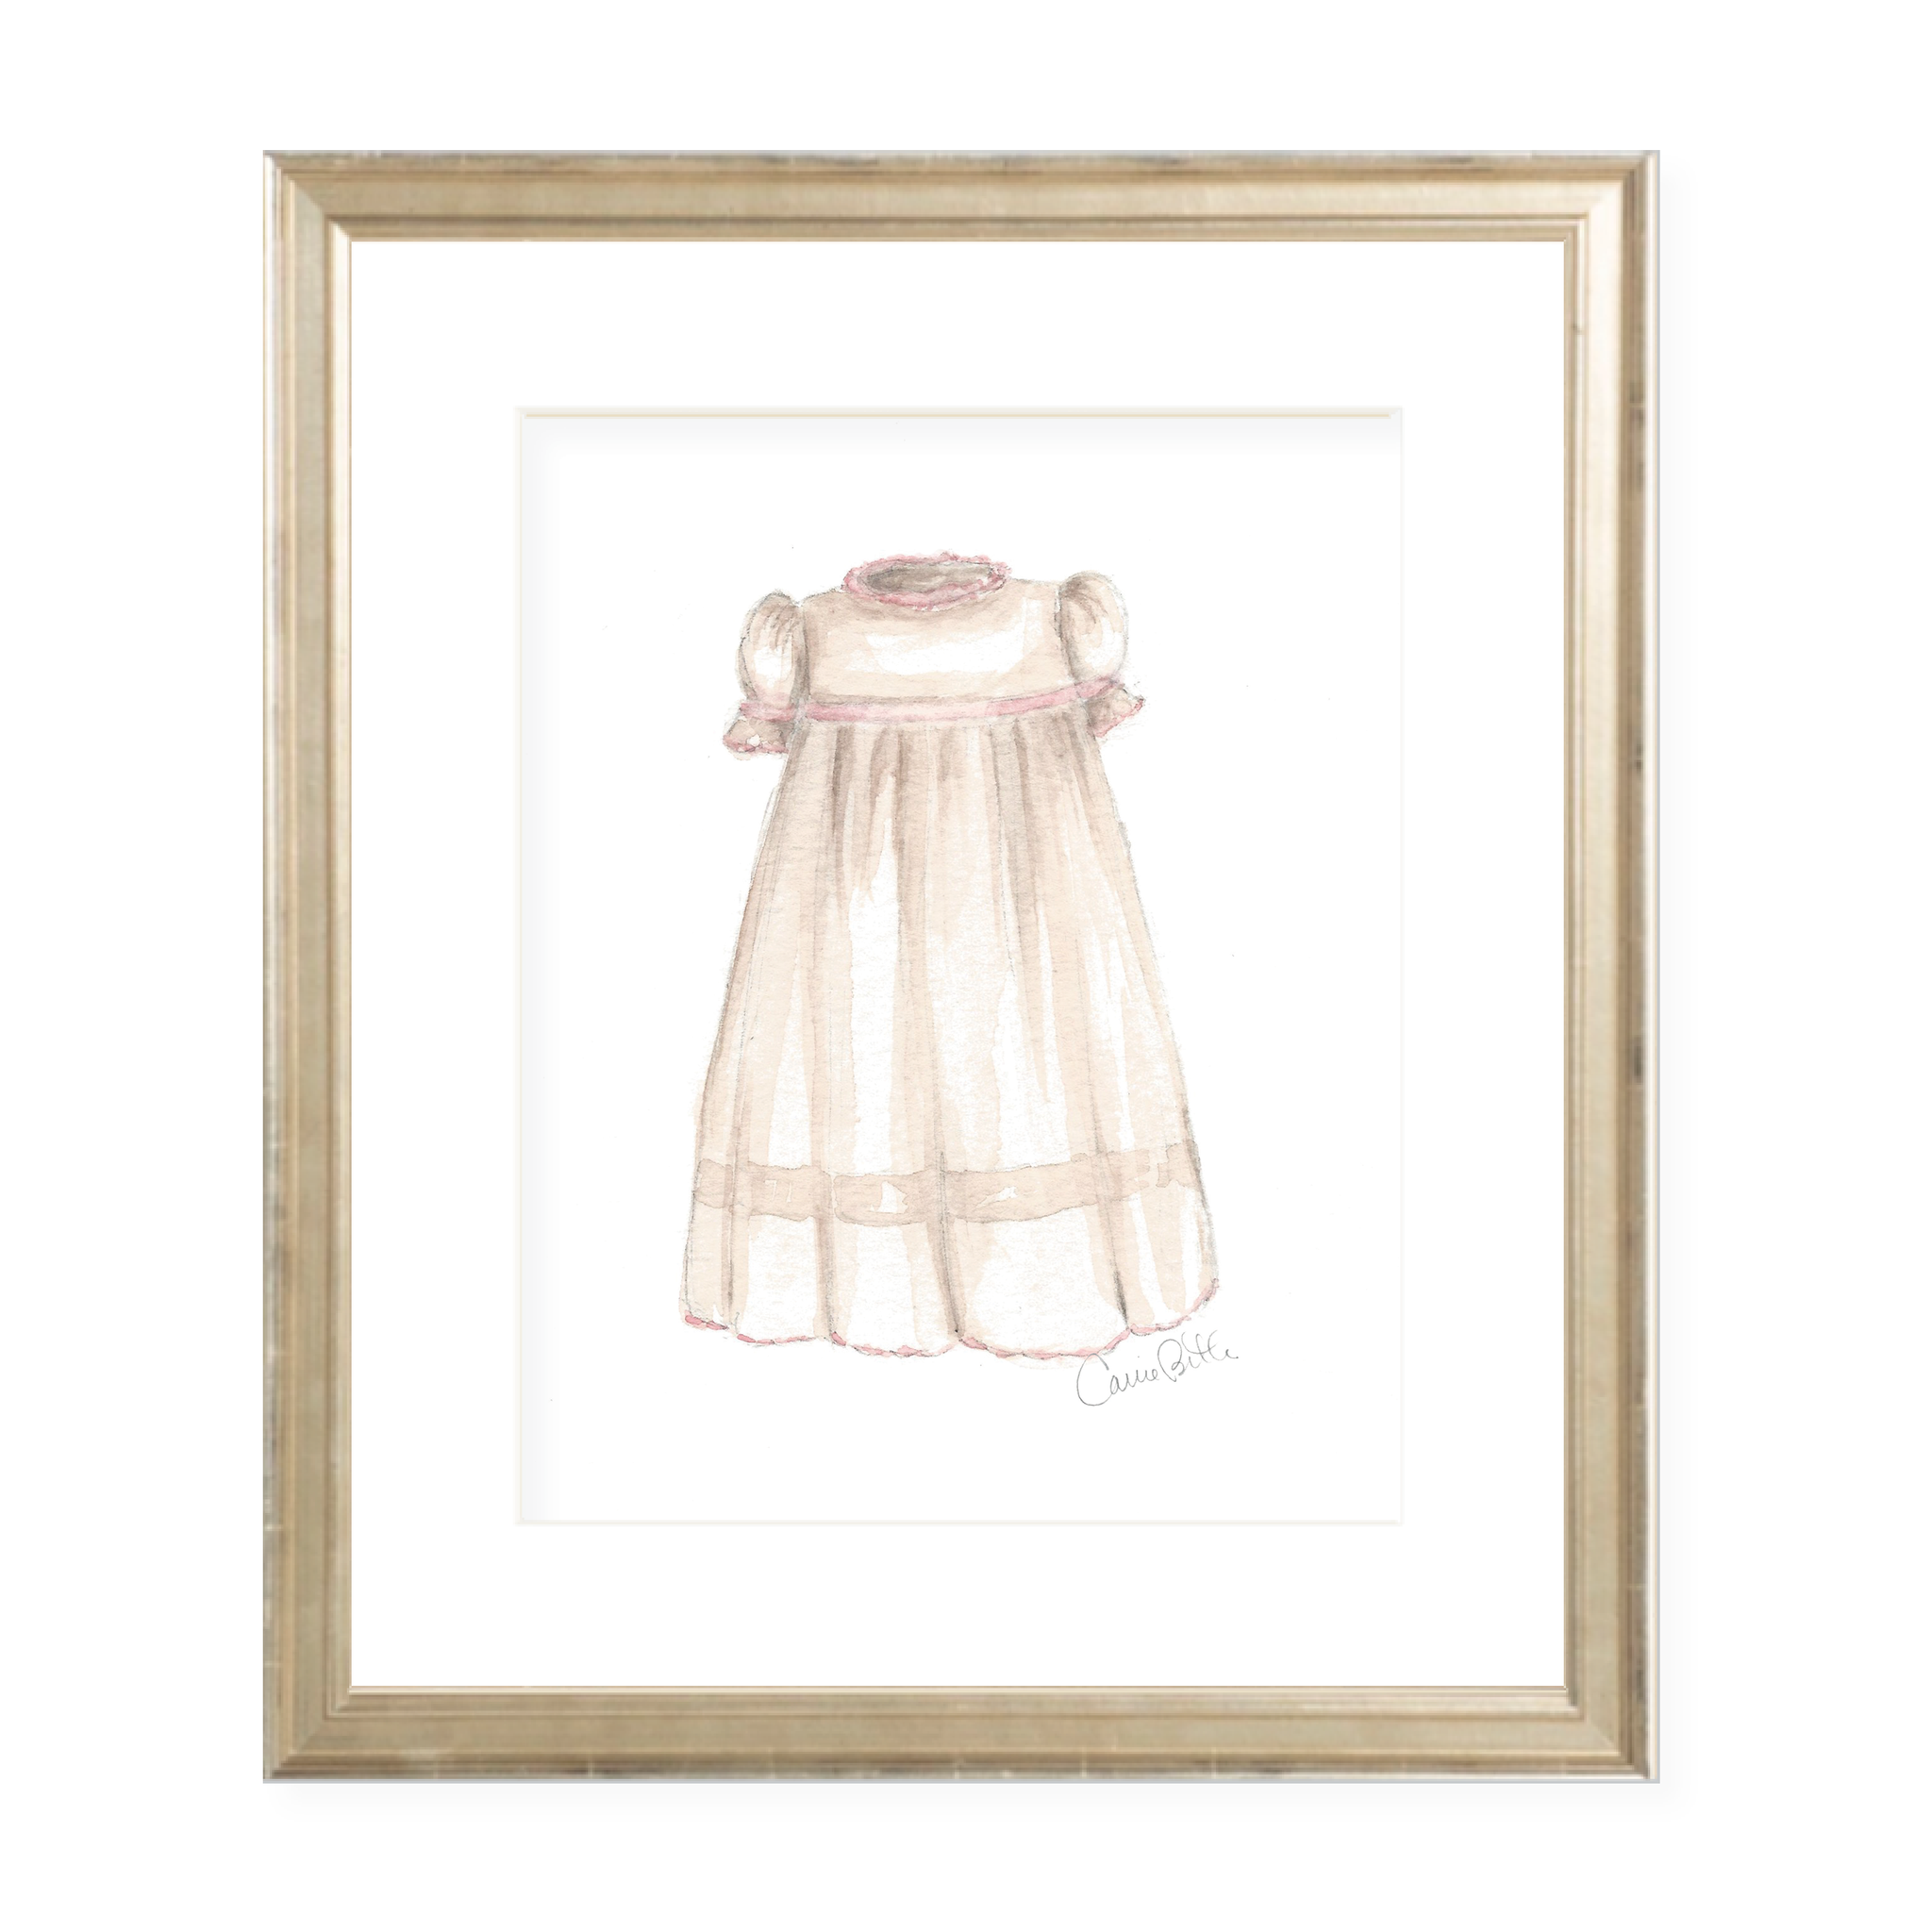 Frances Hereford Dress in Pink Watercolor Print